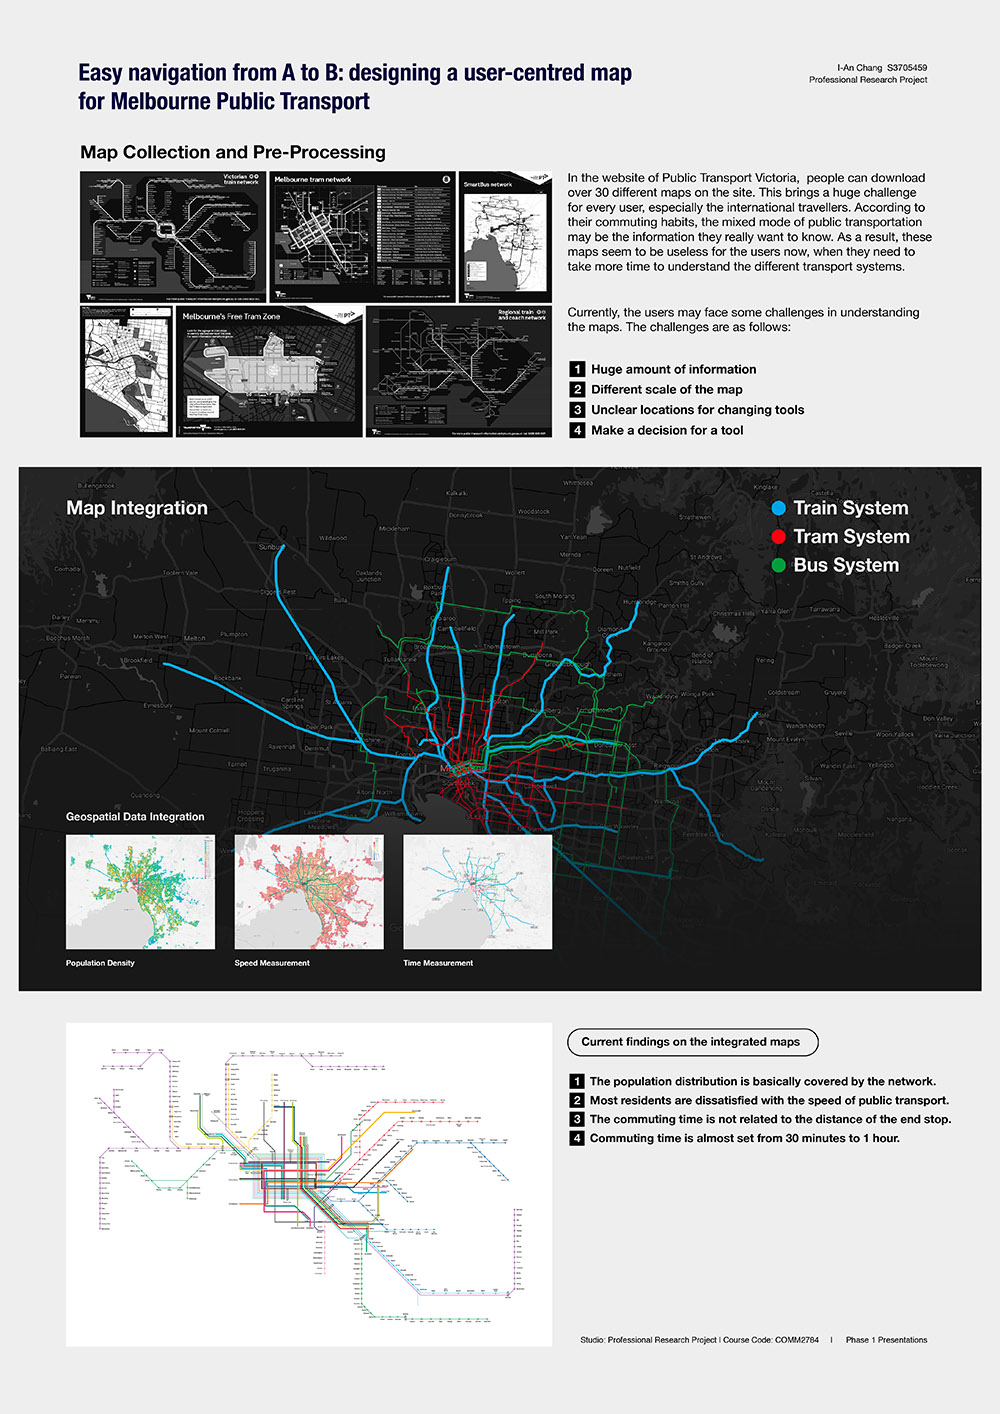 The purpose of this phase is to understand the differences between each type of public transportation in Melbourne. In this stage, it reveals some important insights into the multimodal transport mode. If people want to smoothly travel between the city and the suburbs in Melbourne, they have to use mixing public transport modes sometime due to the different service coverage of the transport system. Finally, this study selected the top three transportation modes in Melbourne to redesign the map, including buses, trains and trams.